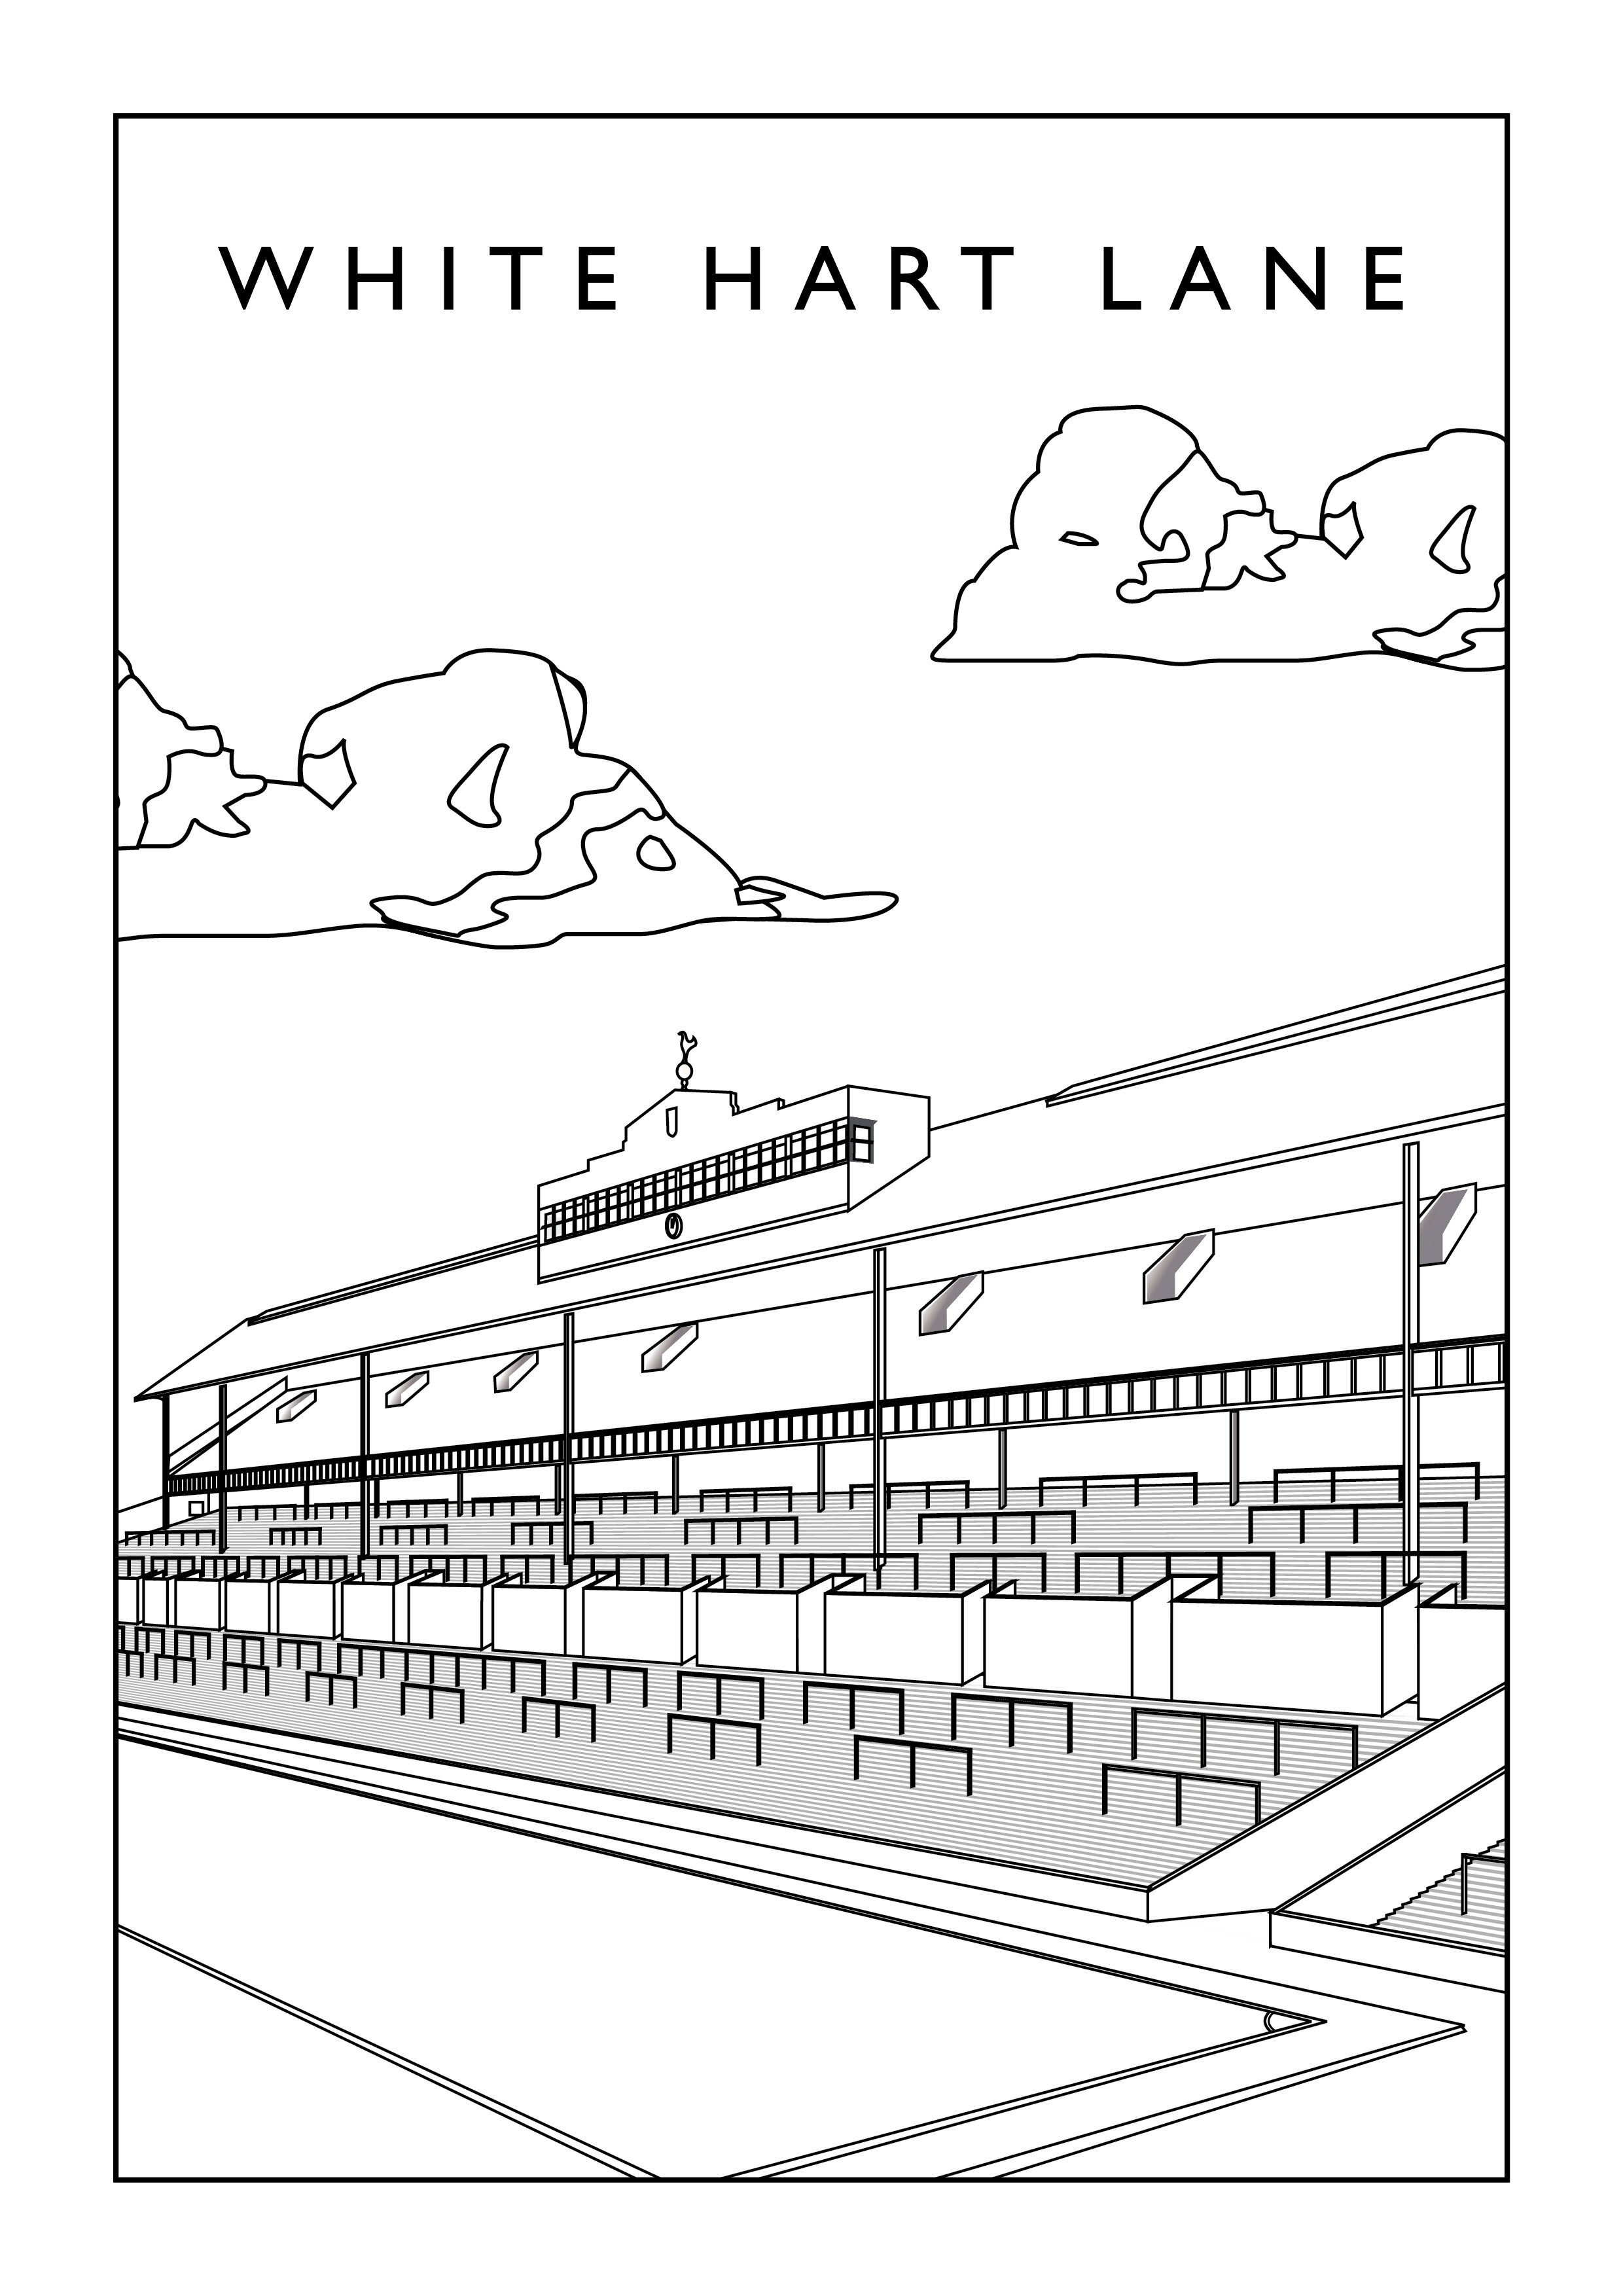 white hart lane coloring pages